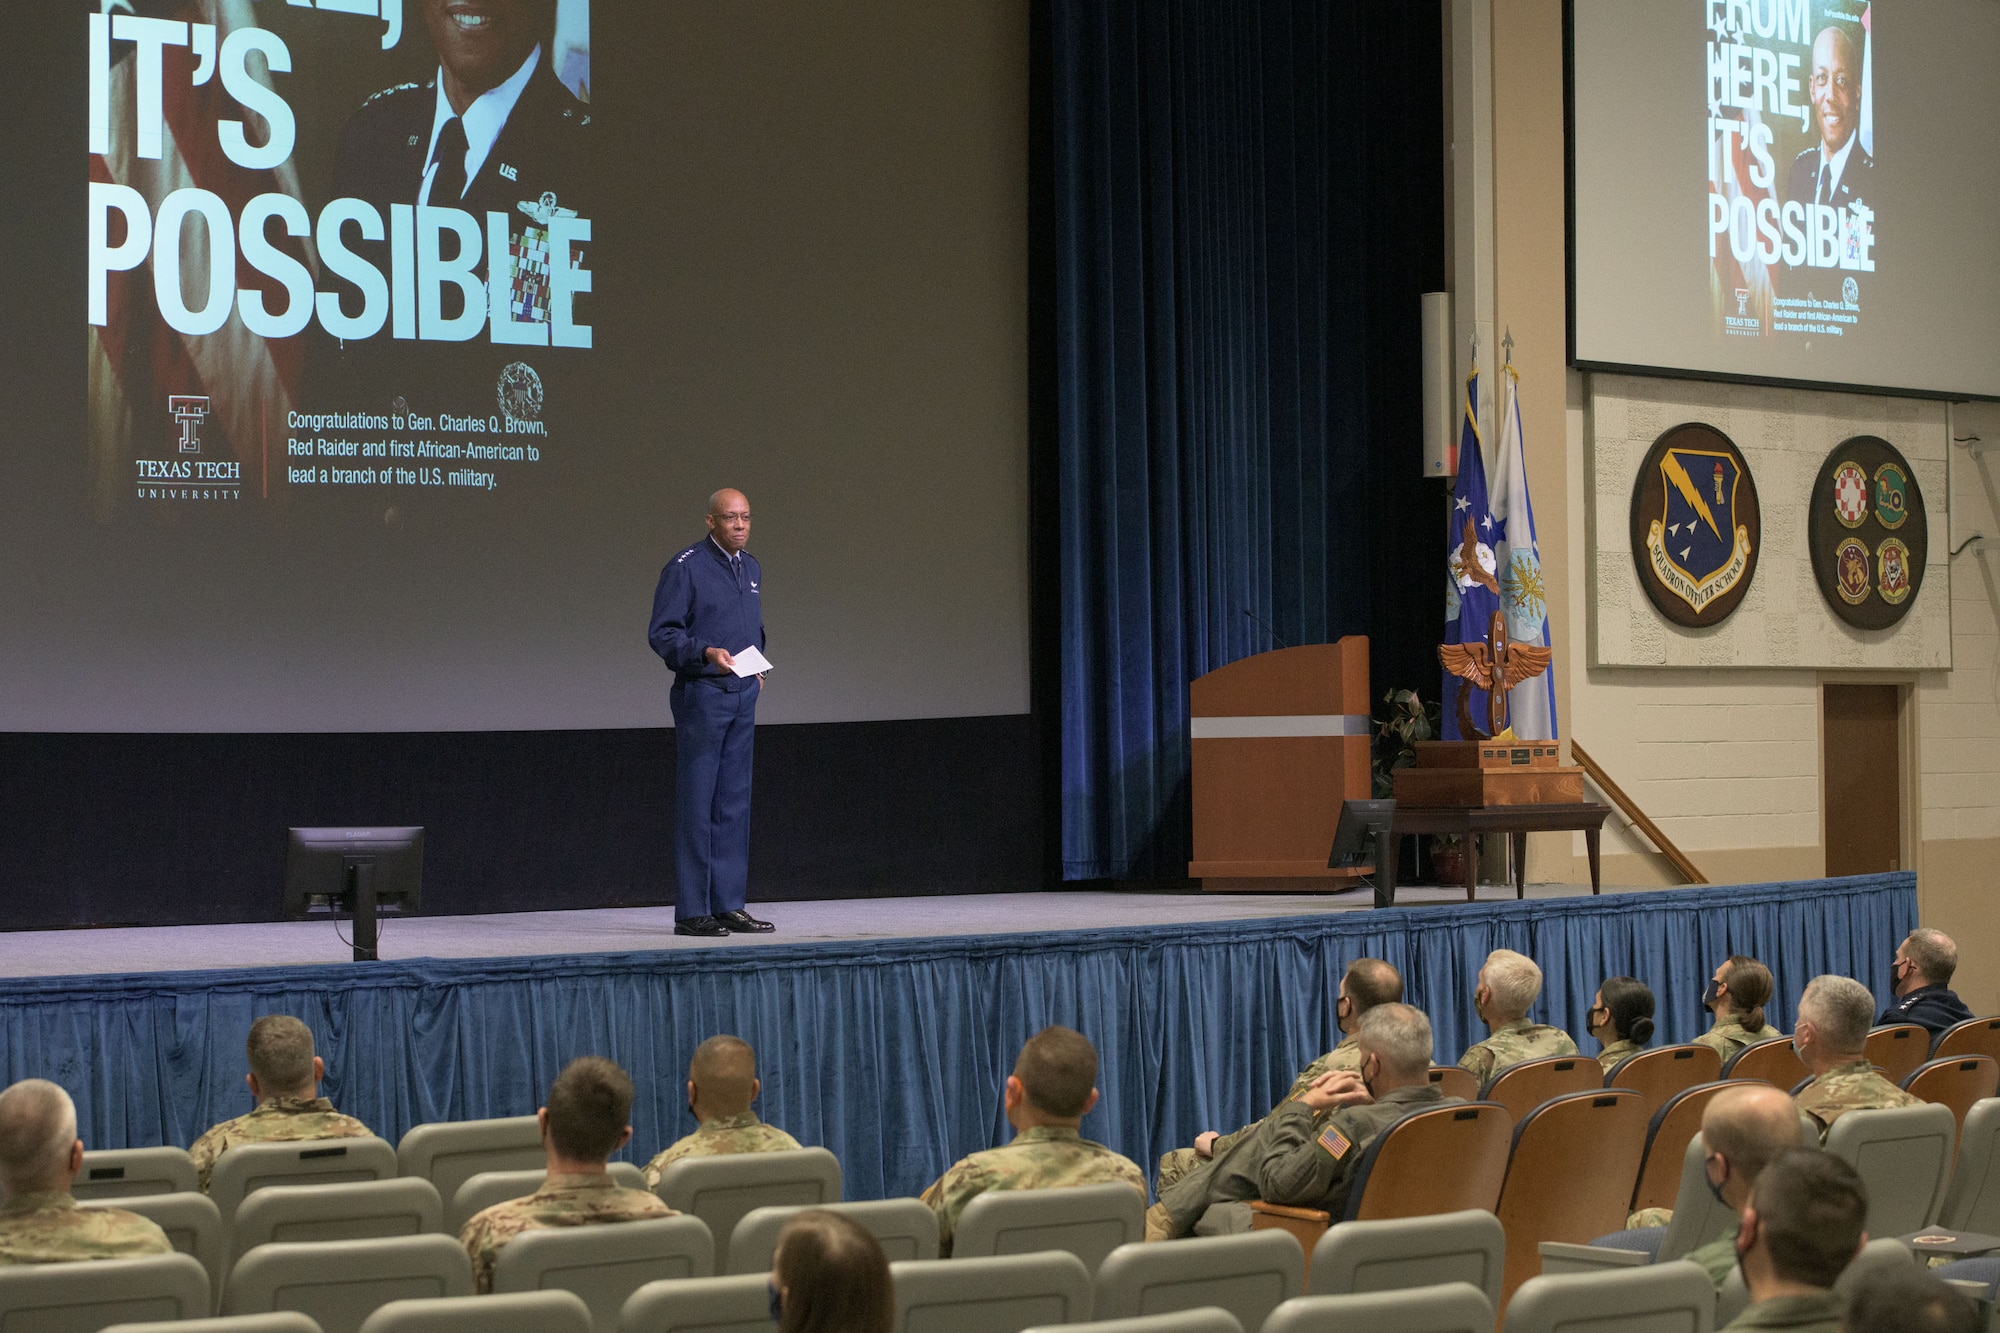 Air Force Chief of Staff Gen. CQ Brown, Jr. addresses attendees of the Air Force ROTC Commanders Symposium. Brown took the time to share his experience at AFROTC Detachment 820 at Texas Tech University and his perspective on leadership.